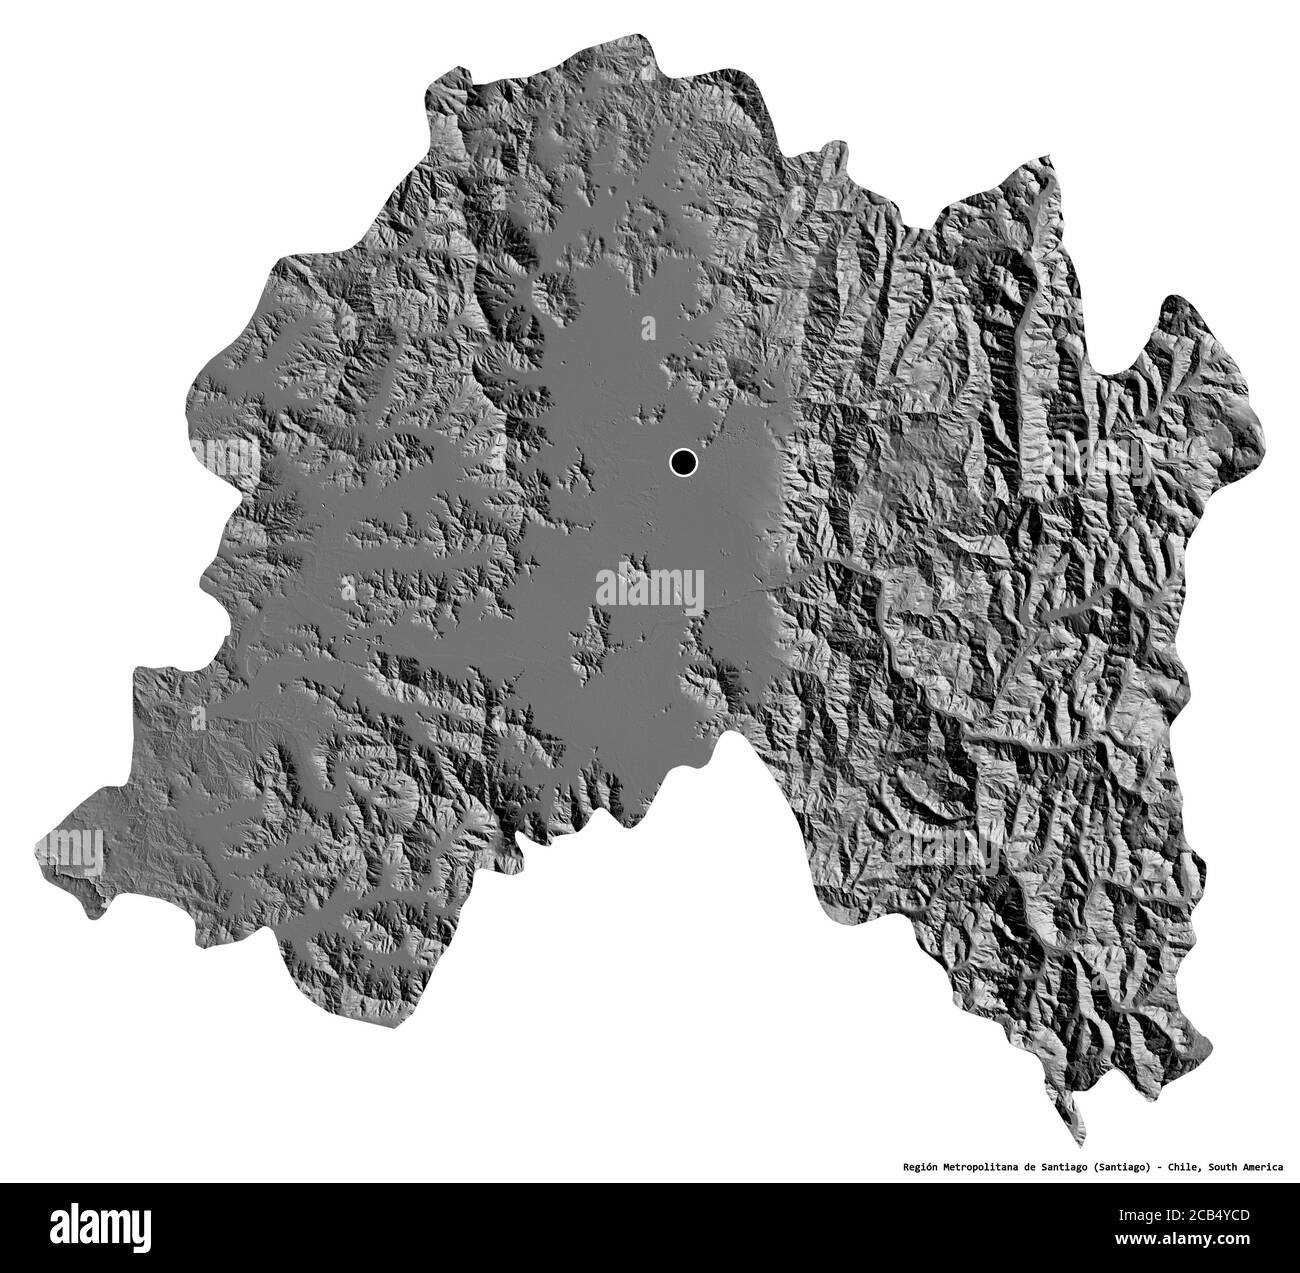 Shape of Región Metropolitana de Santiago, region of Chile, with its capital isolated on white background. Bilevel elevation map. 3D rendering Stock Photo